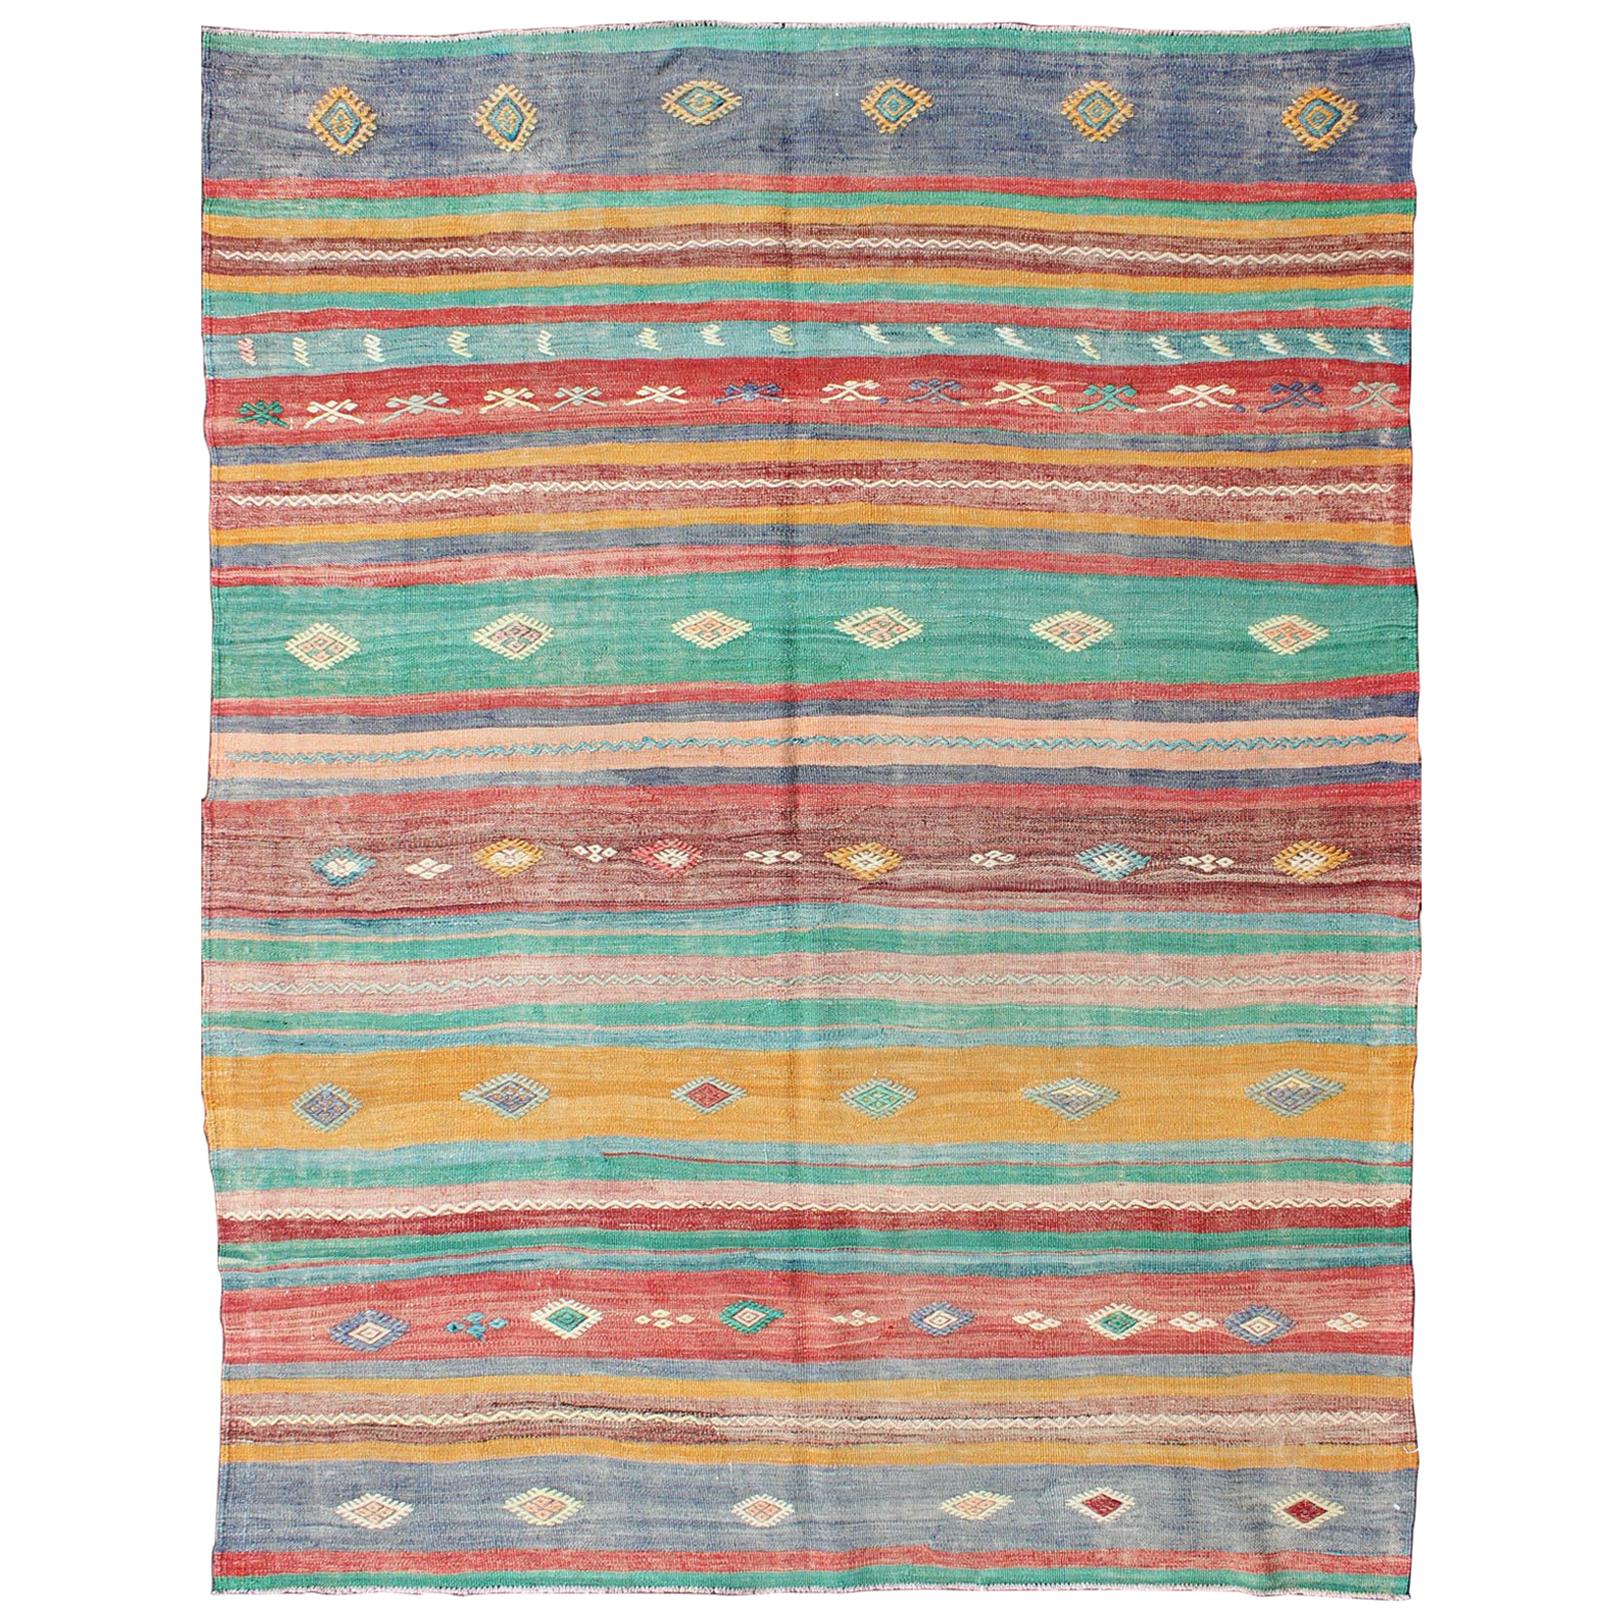 Bright and Colorful Flat-Weave Turkish Kilim Rug with Geometric Stripe Design For Sale